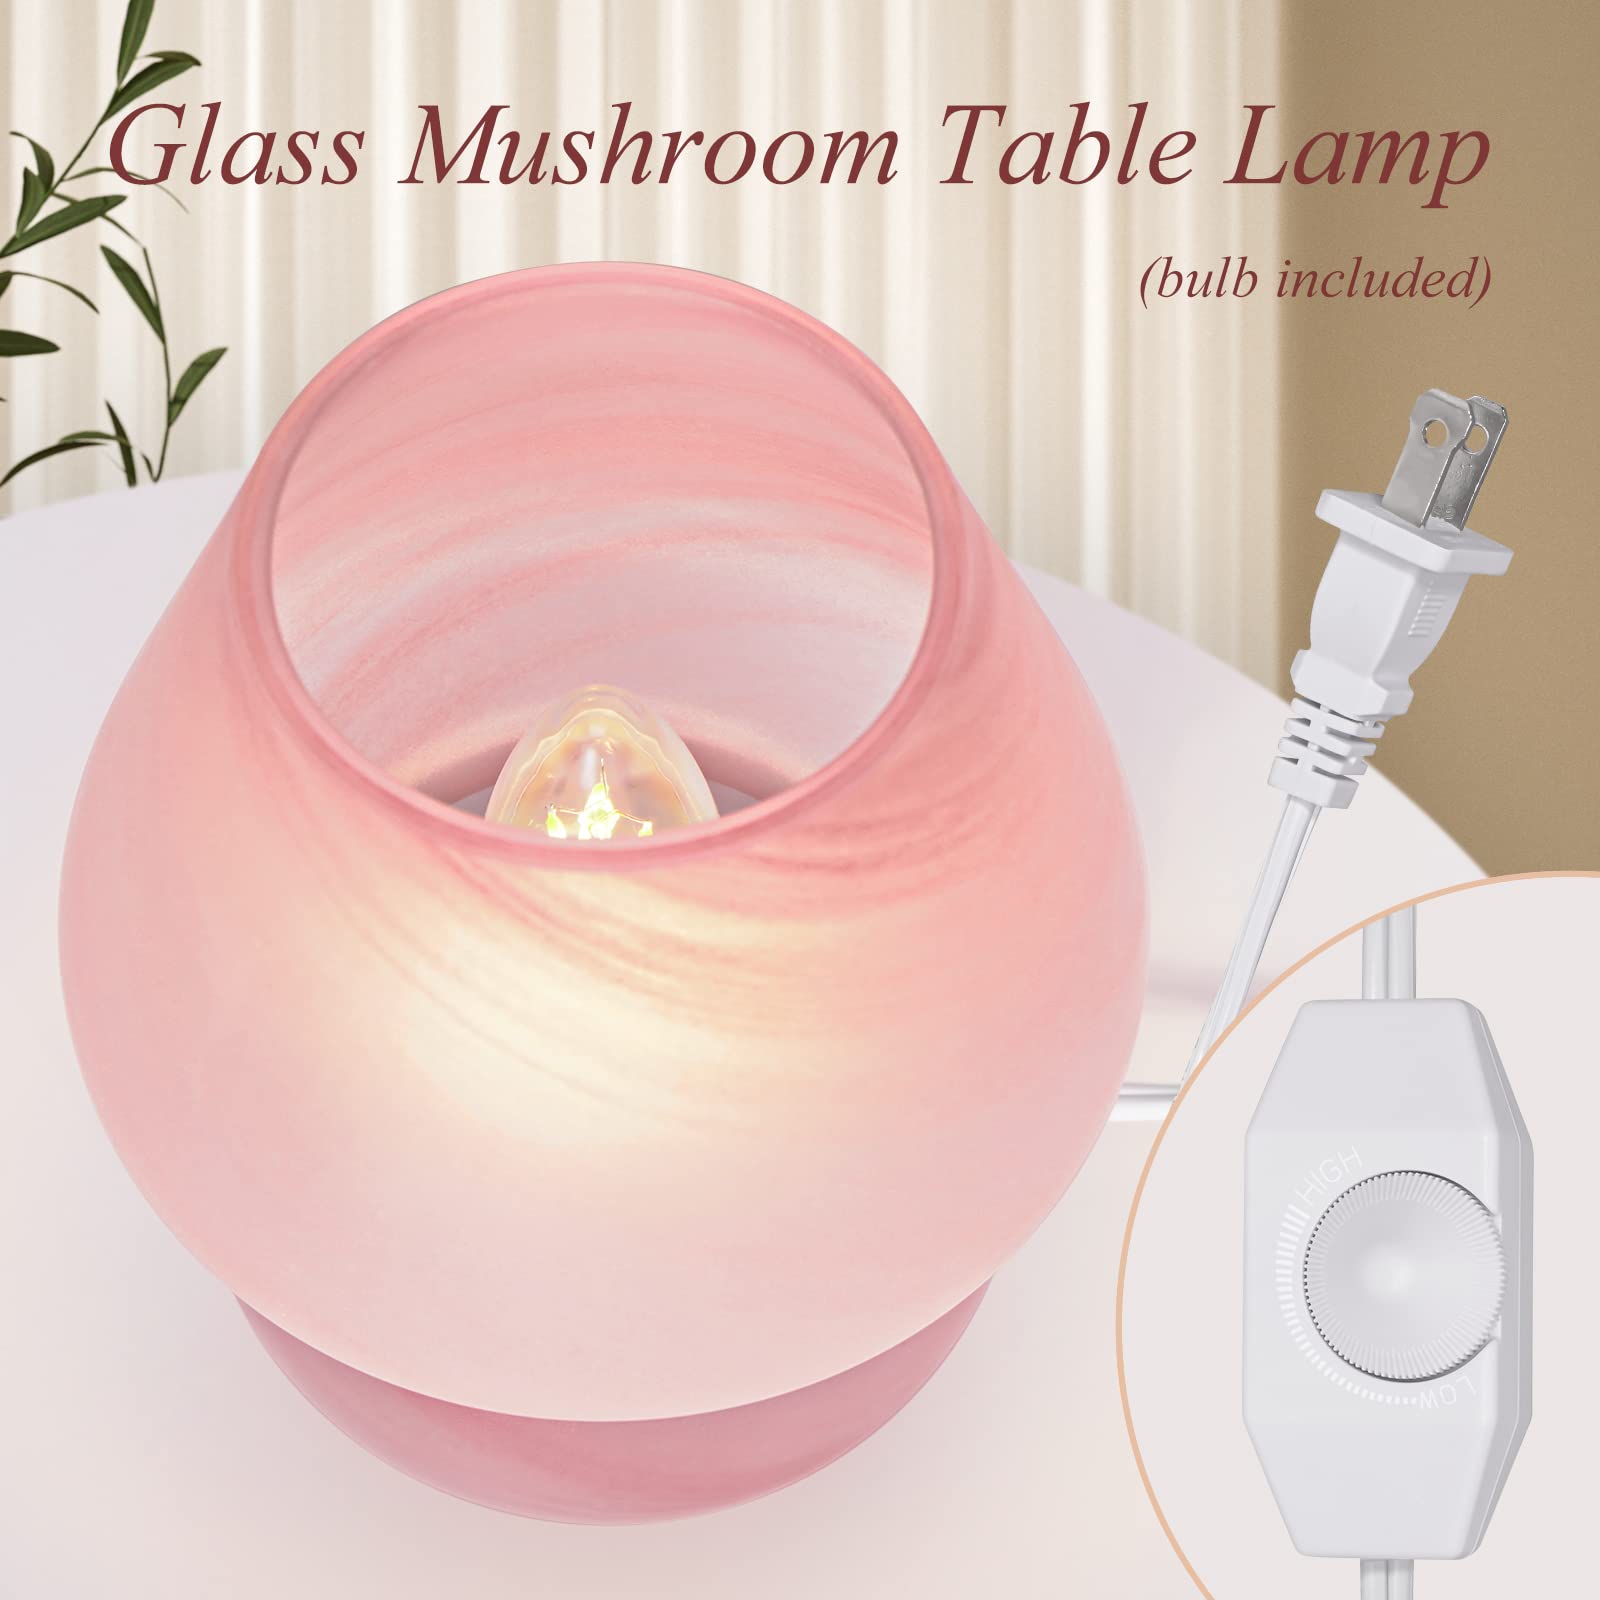 ONEWISH Mushroom Lamp Cute Table Lamp for Bedroom Nightstand Soft Light Pink, Small Glass Nightlight Stepless Dimmable Desk Lamp for Dining, Living, Nursery, Vanity, Home Decor Gift for Girls Women